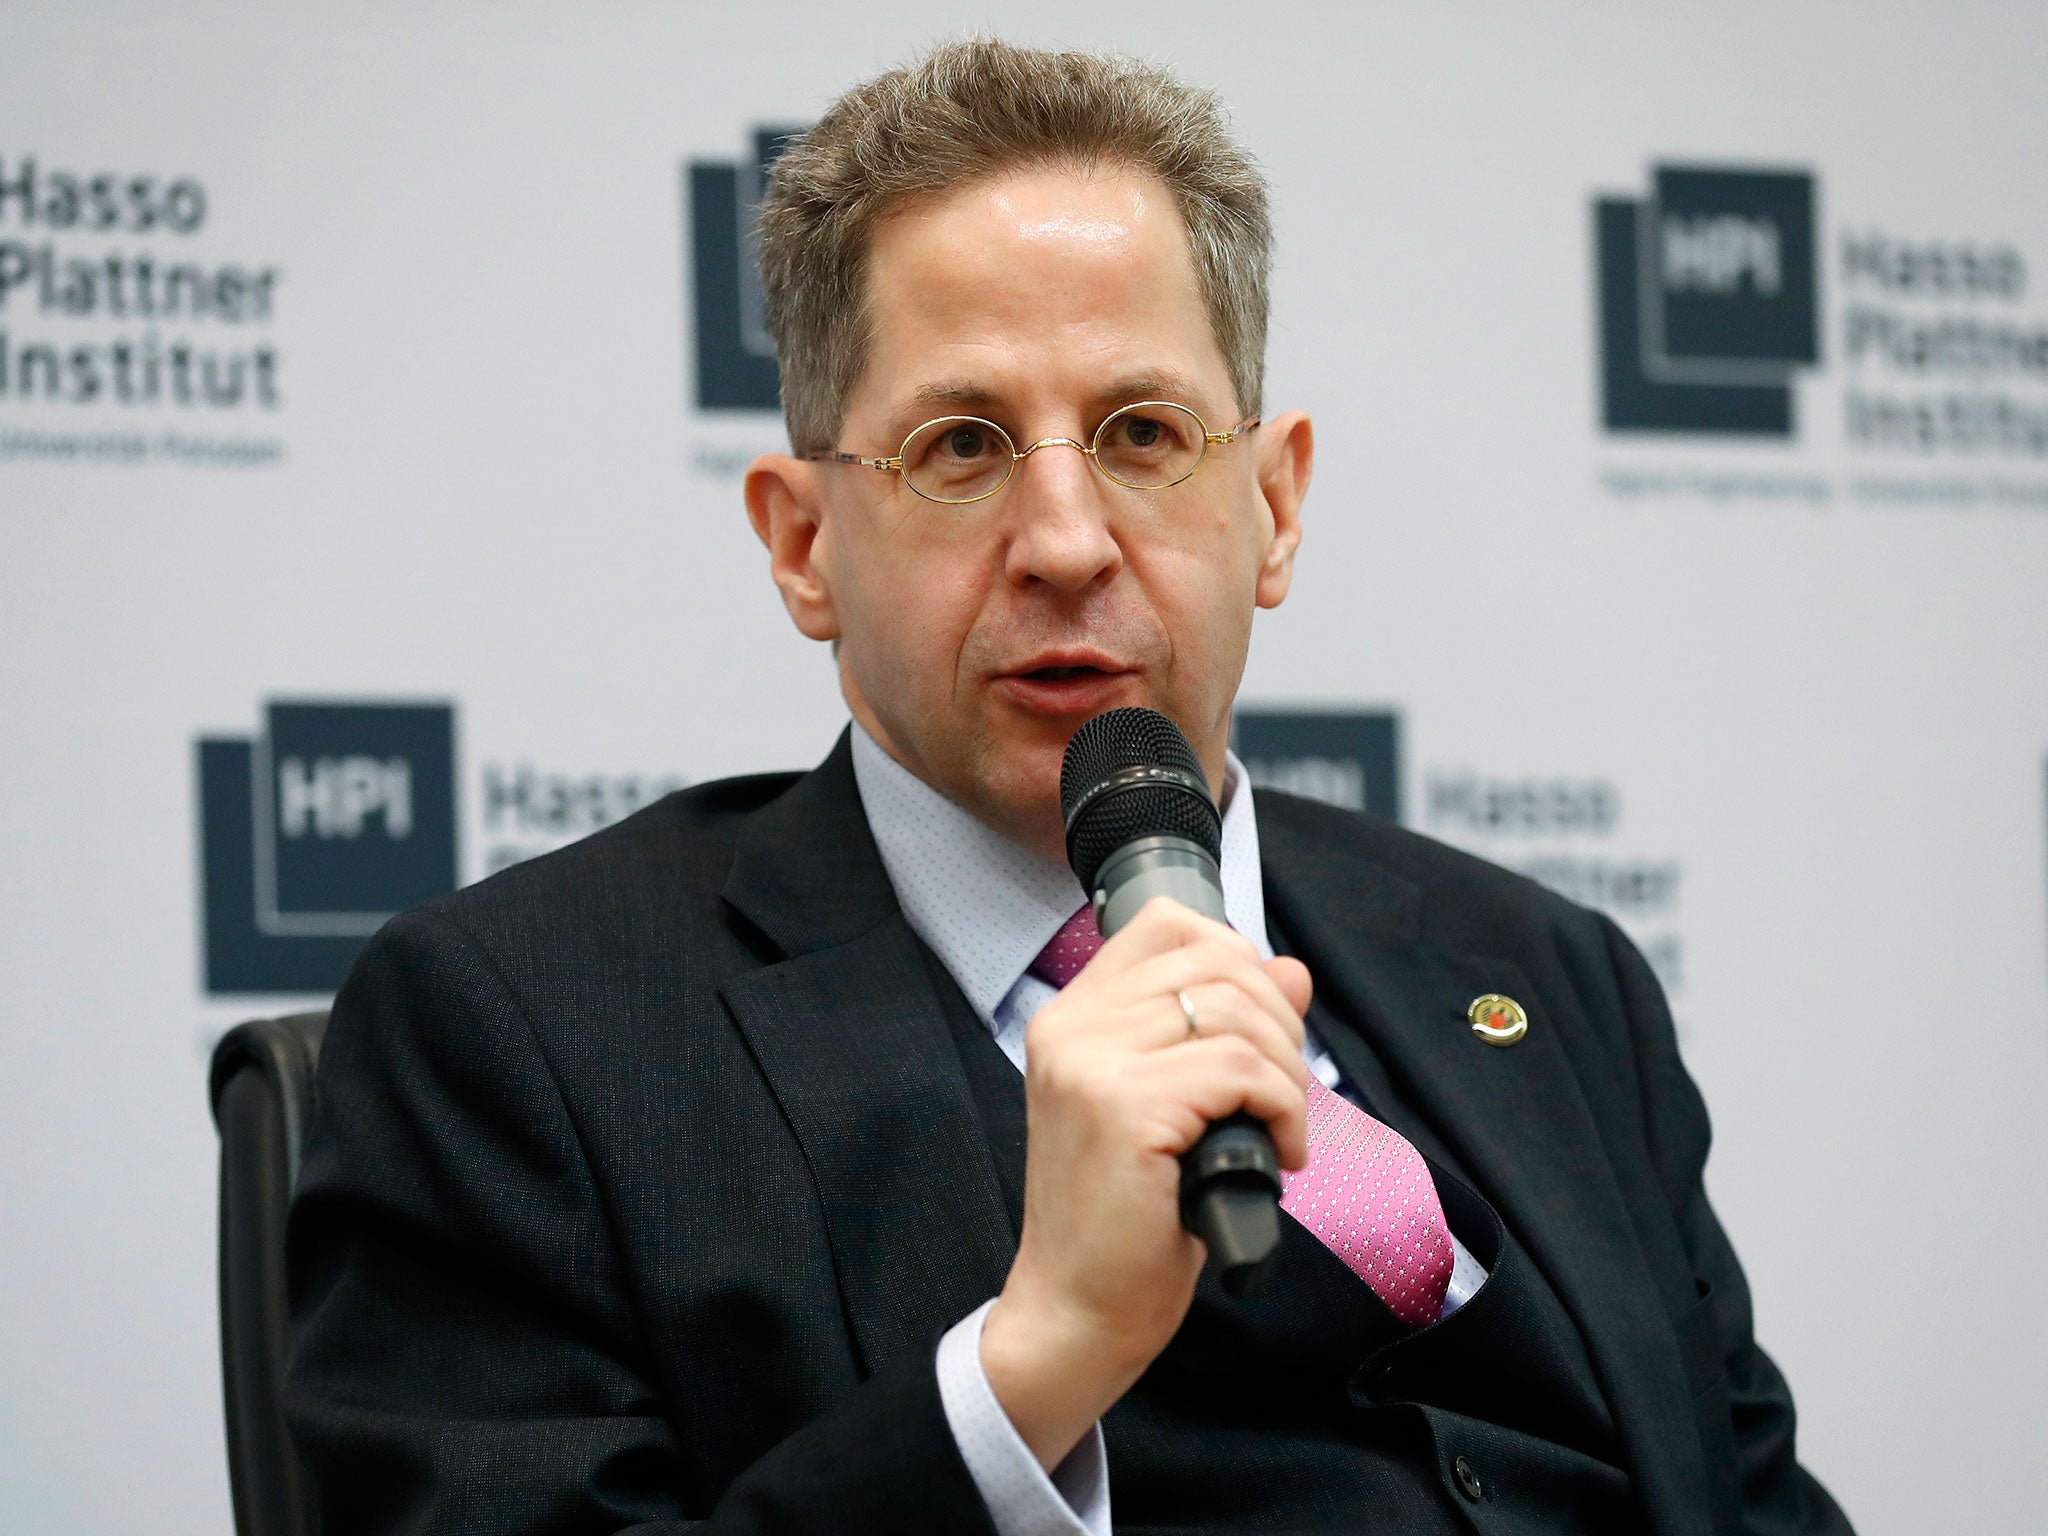 The head of Germany's domestic intelligence service, Hans-Georg Maassen, takes part in the Potsdam Conference on National Cybersecurity on 4 May